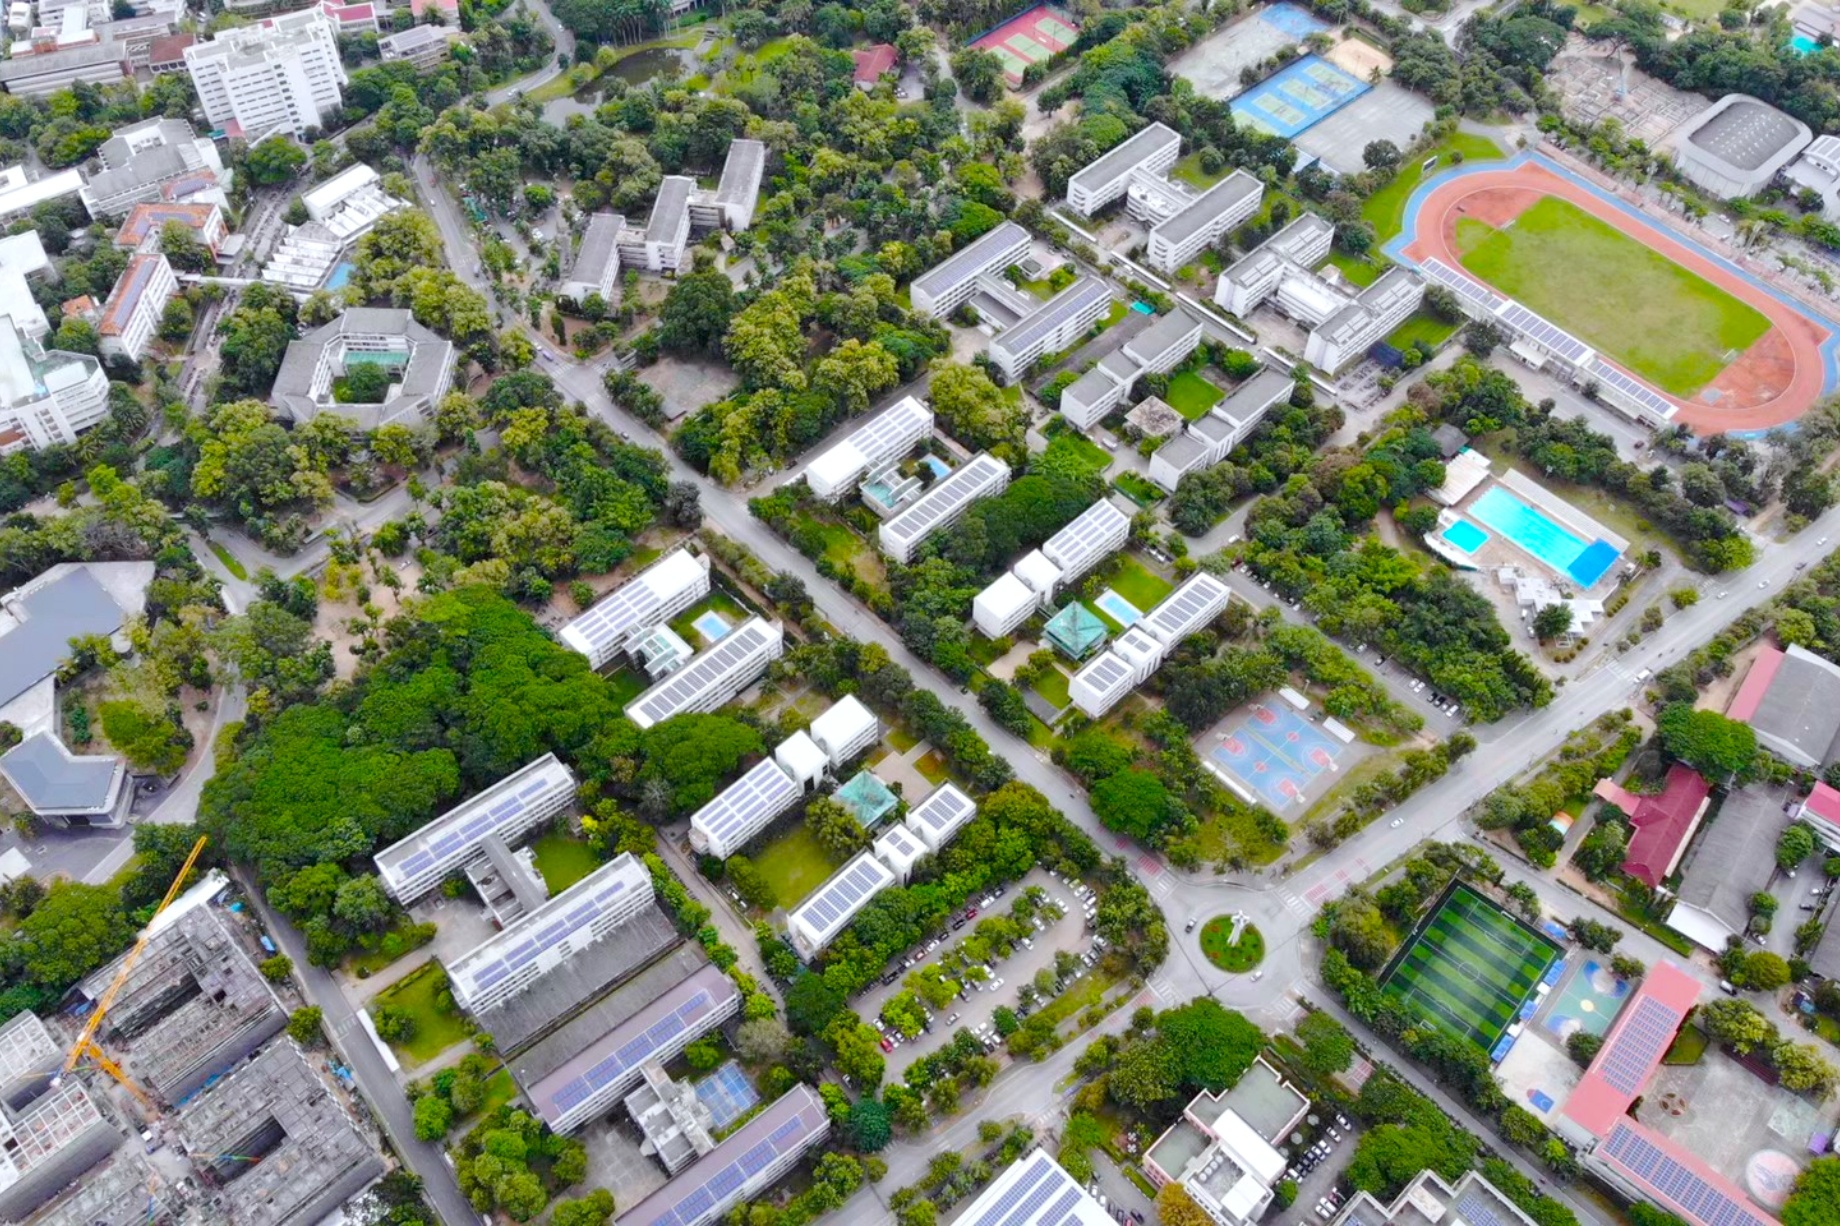 Chiang Mai University - Pioneering the Path to Clean Energy